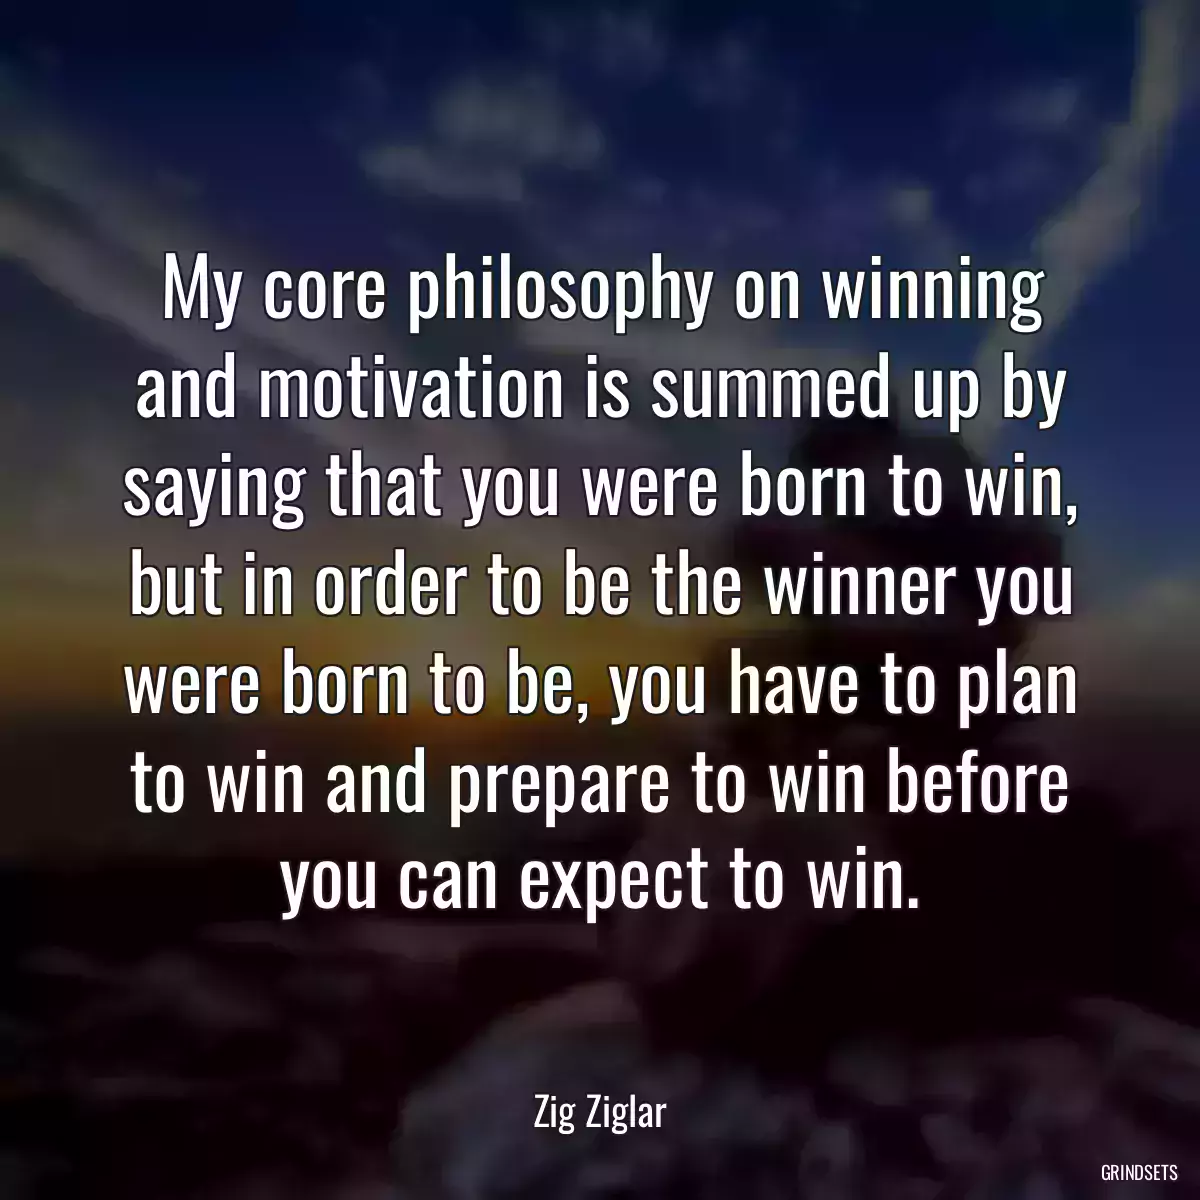 My core philosophy on winning and motivation is summed up by saying that you were born to win, but in order to be the winner you were born to be, you have to plan to win and prepare to win before you can expect to win.